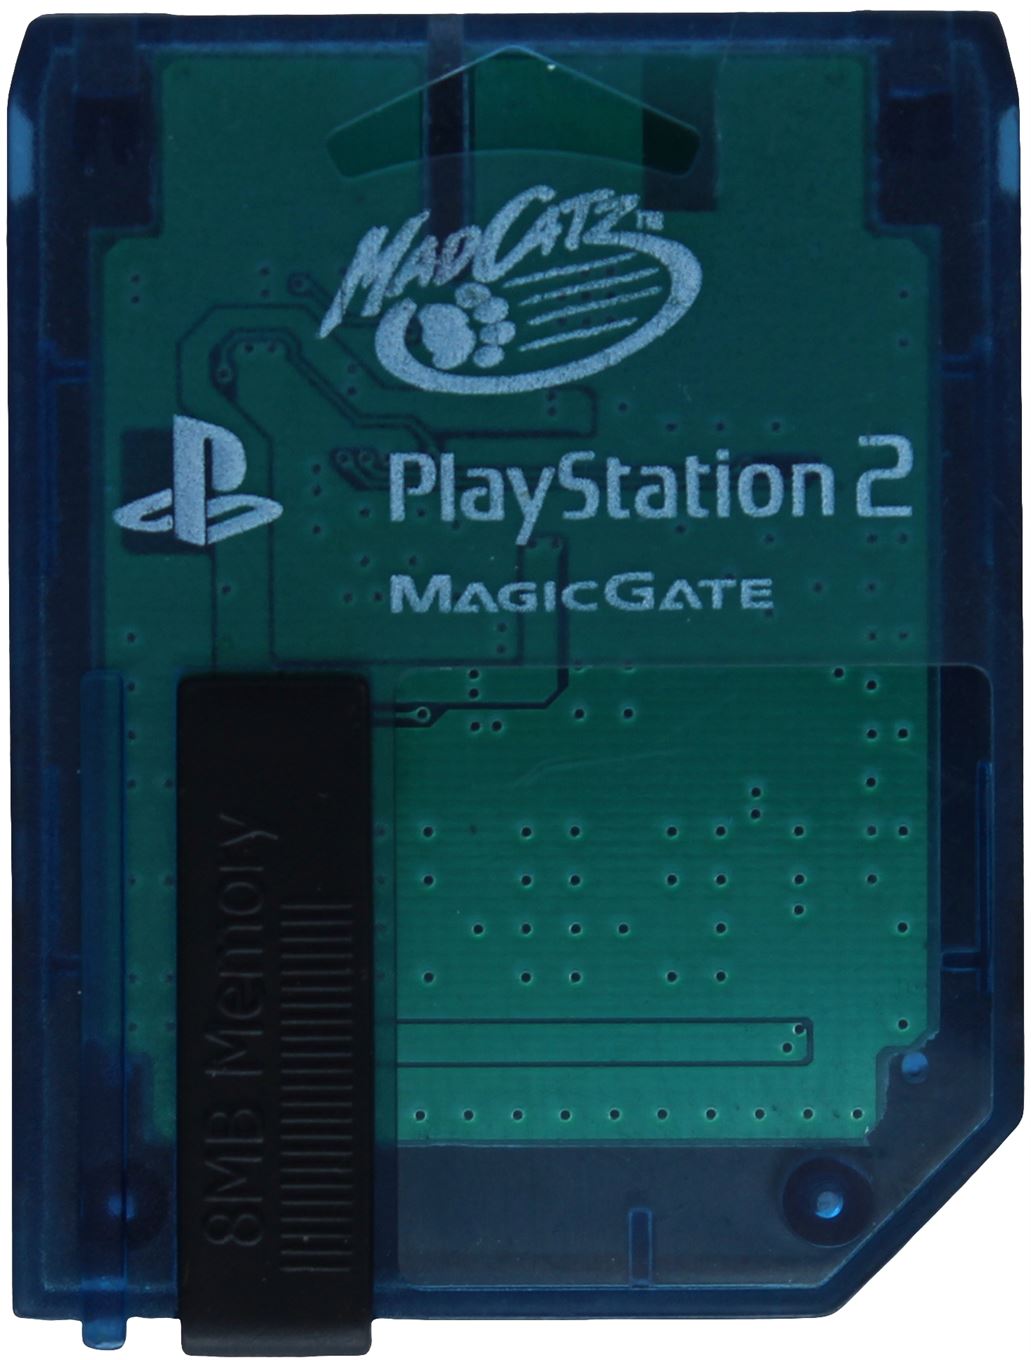 Sony PlayStation 2 (PS2) 8MB Memory Card (Mad Catz)